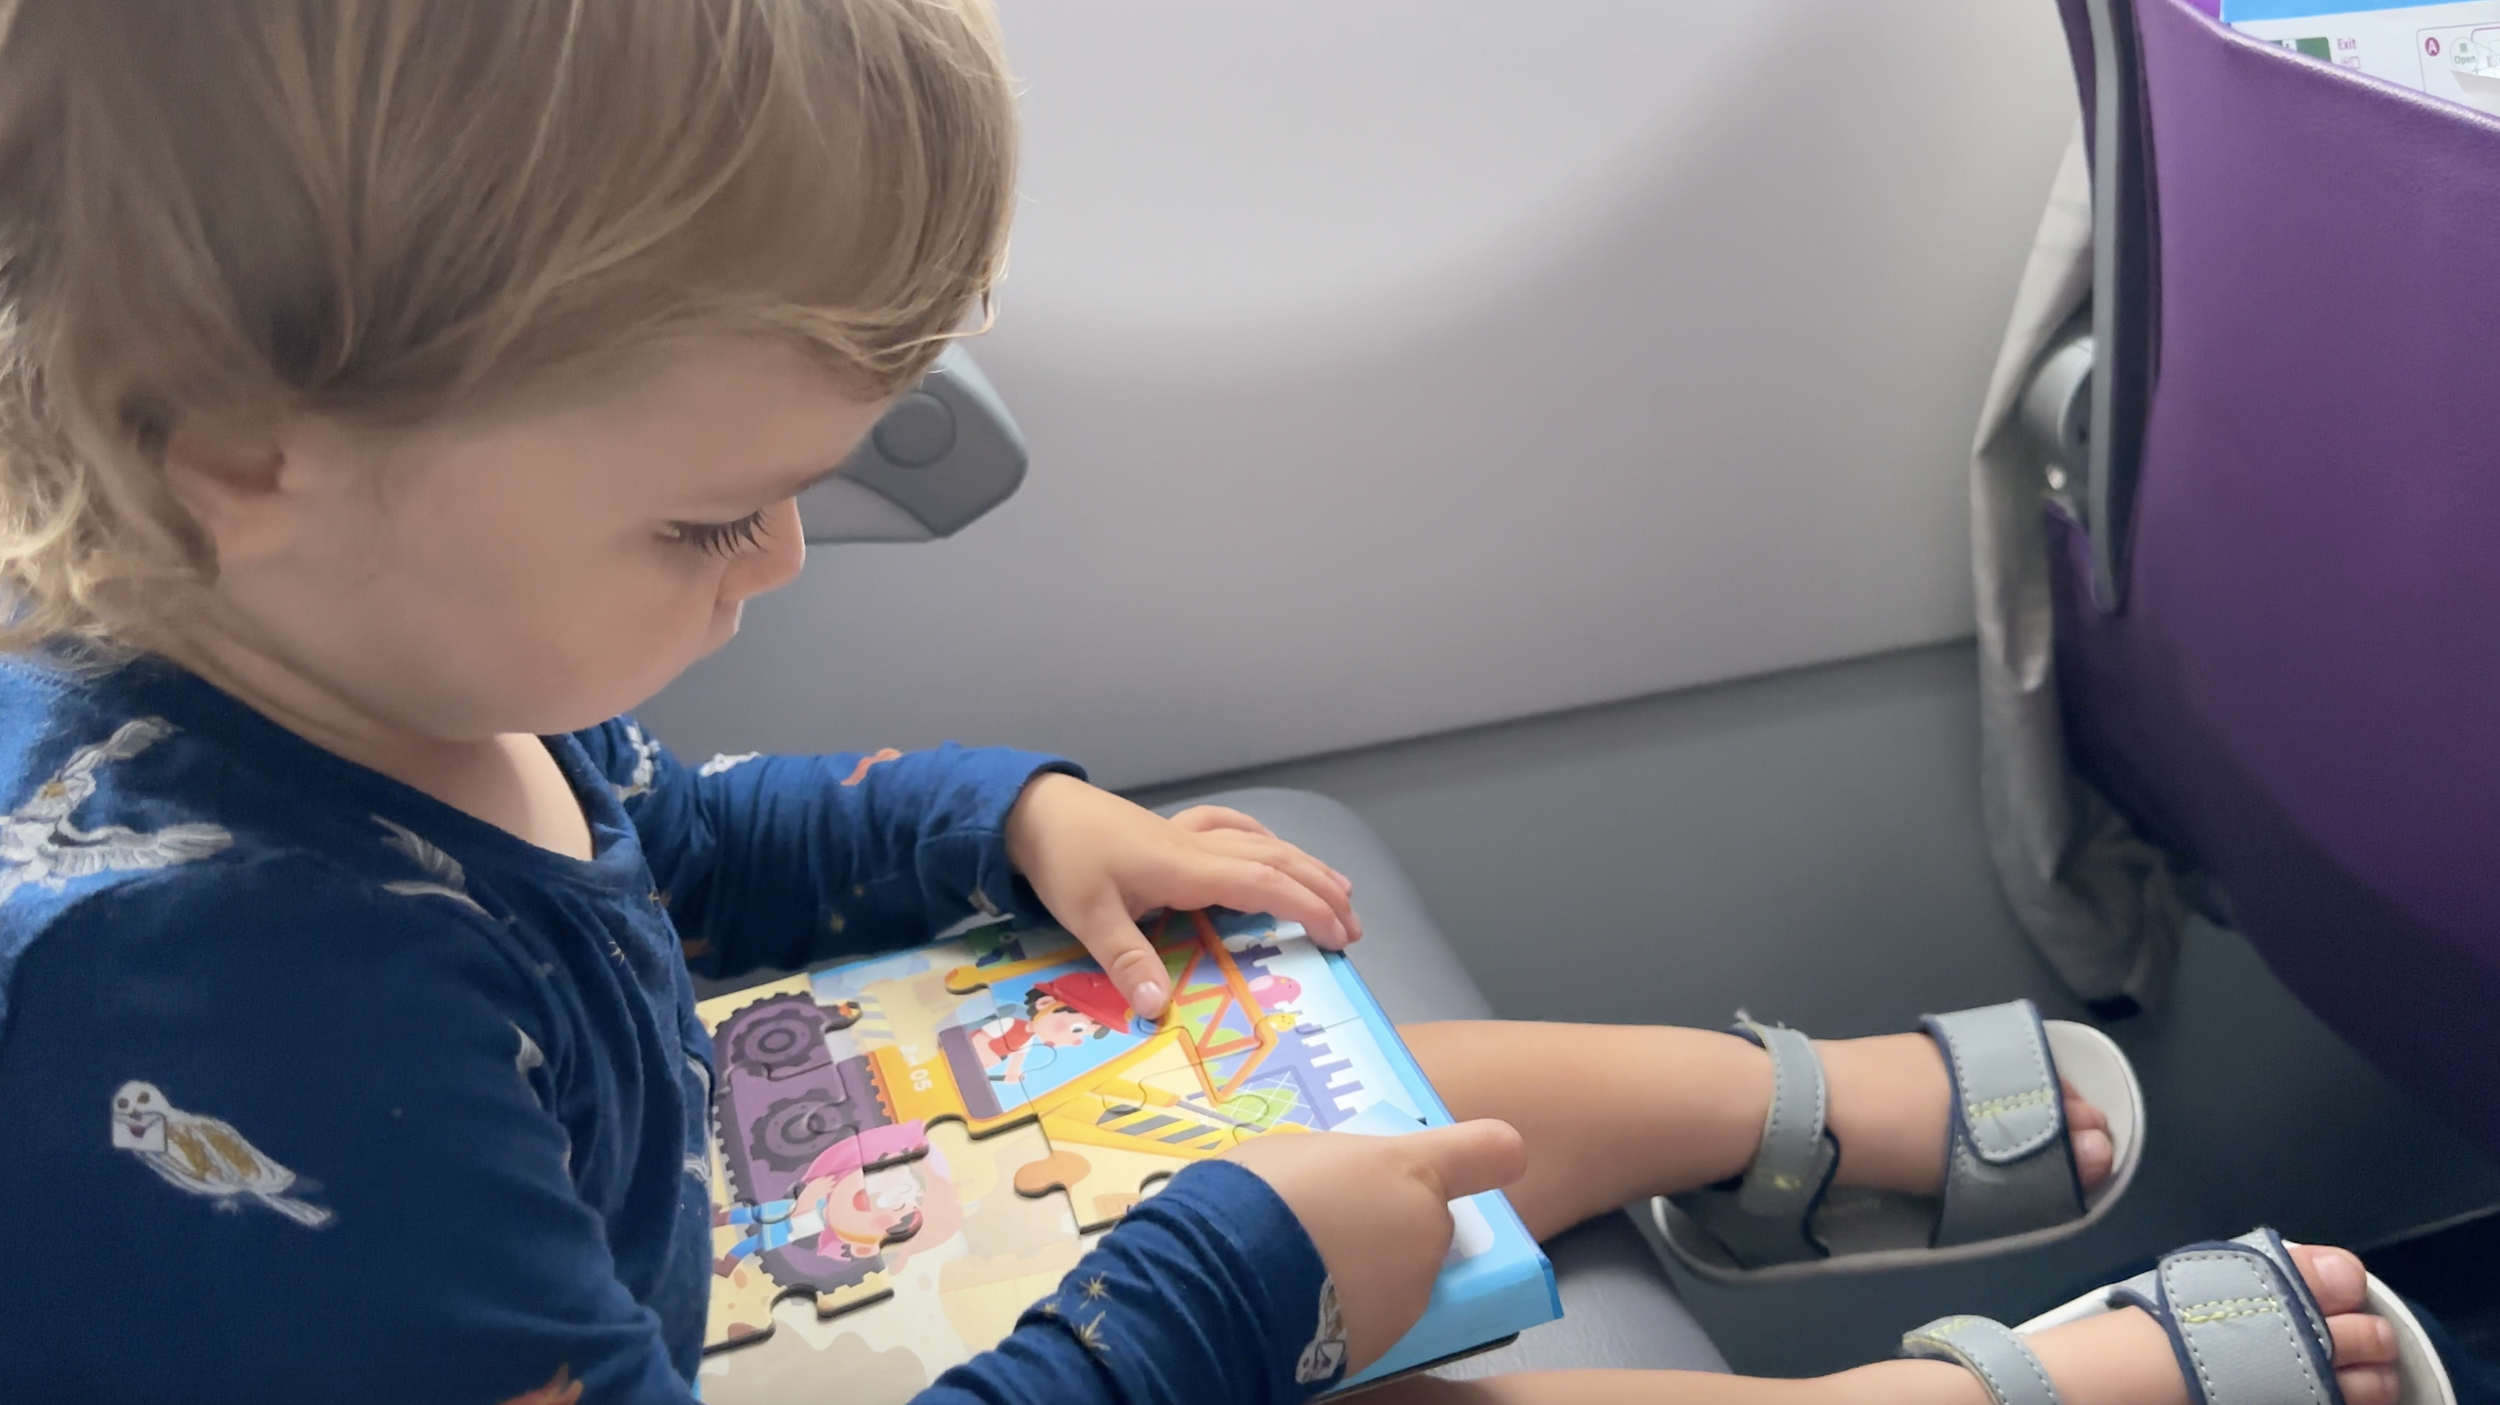 15 Awesome Ways to Entertain a Toddler on a Plane or in the Car! — Big  Brave Nomad